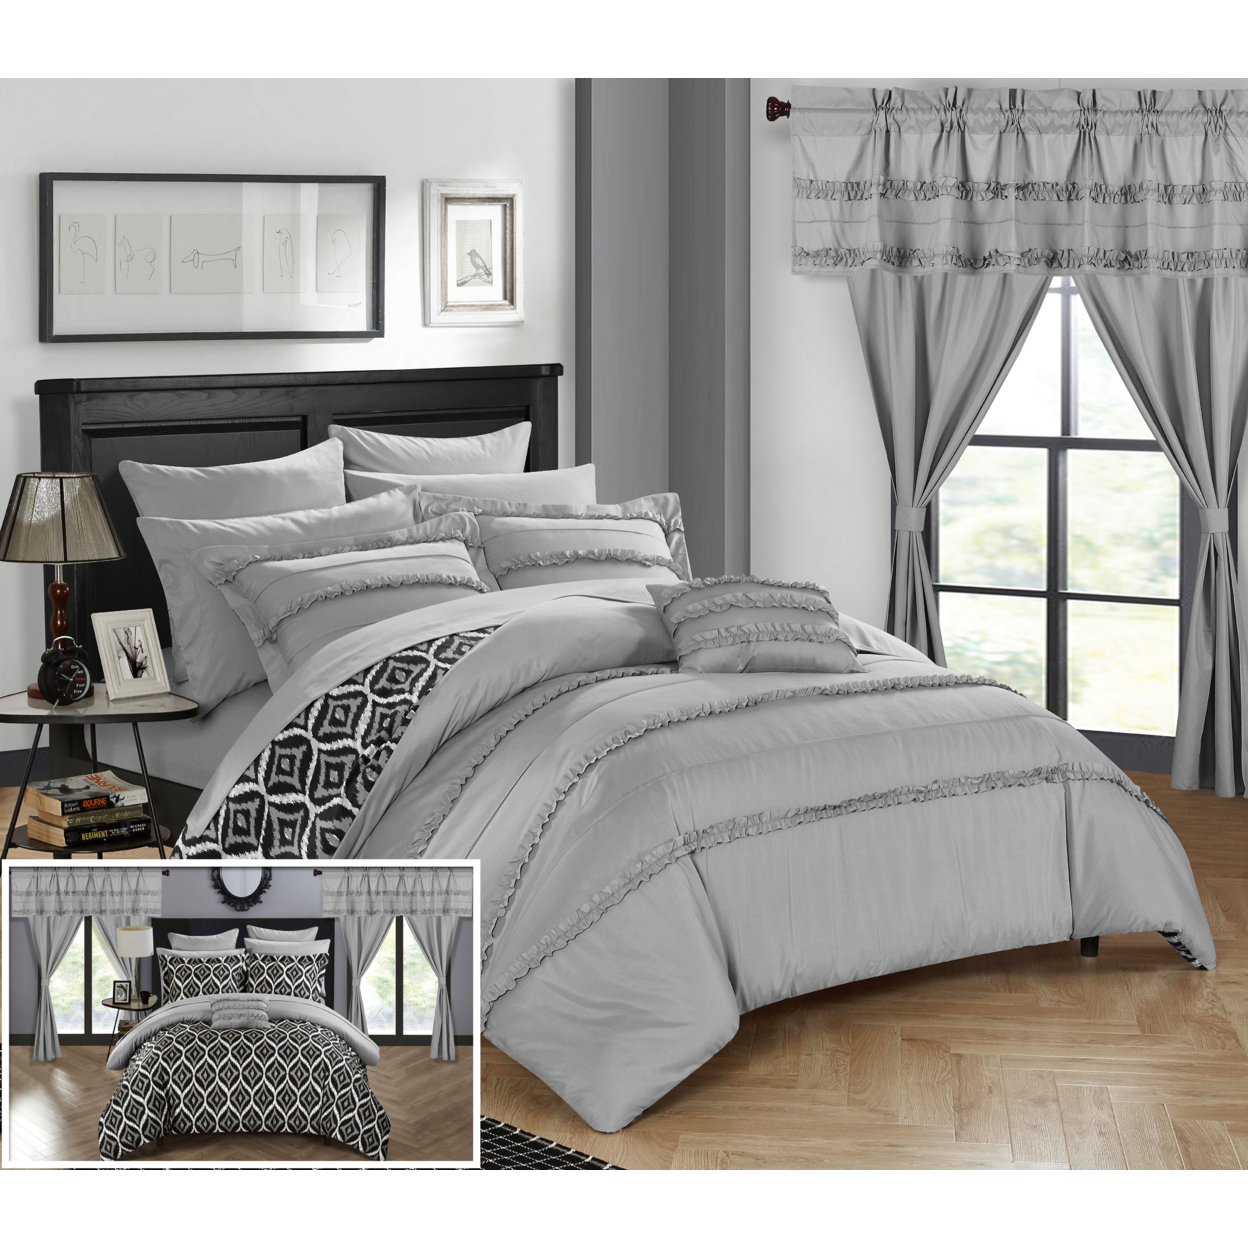 Drew 20 Piece Complete Bed Room In A Bag Super Set. Pinch Pleated Design REVERSIBLE Geometric Pattern Comforter Set, Sheets Set - Grey, King